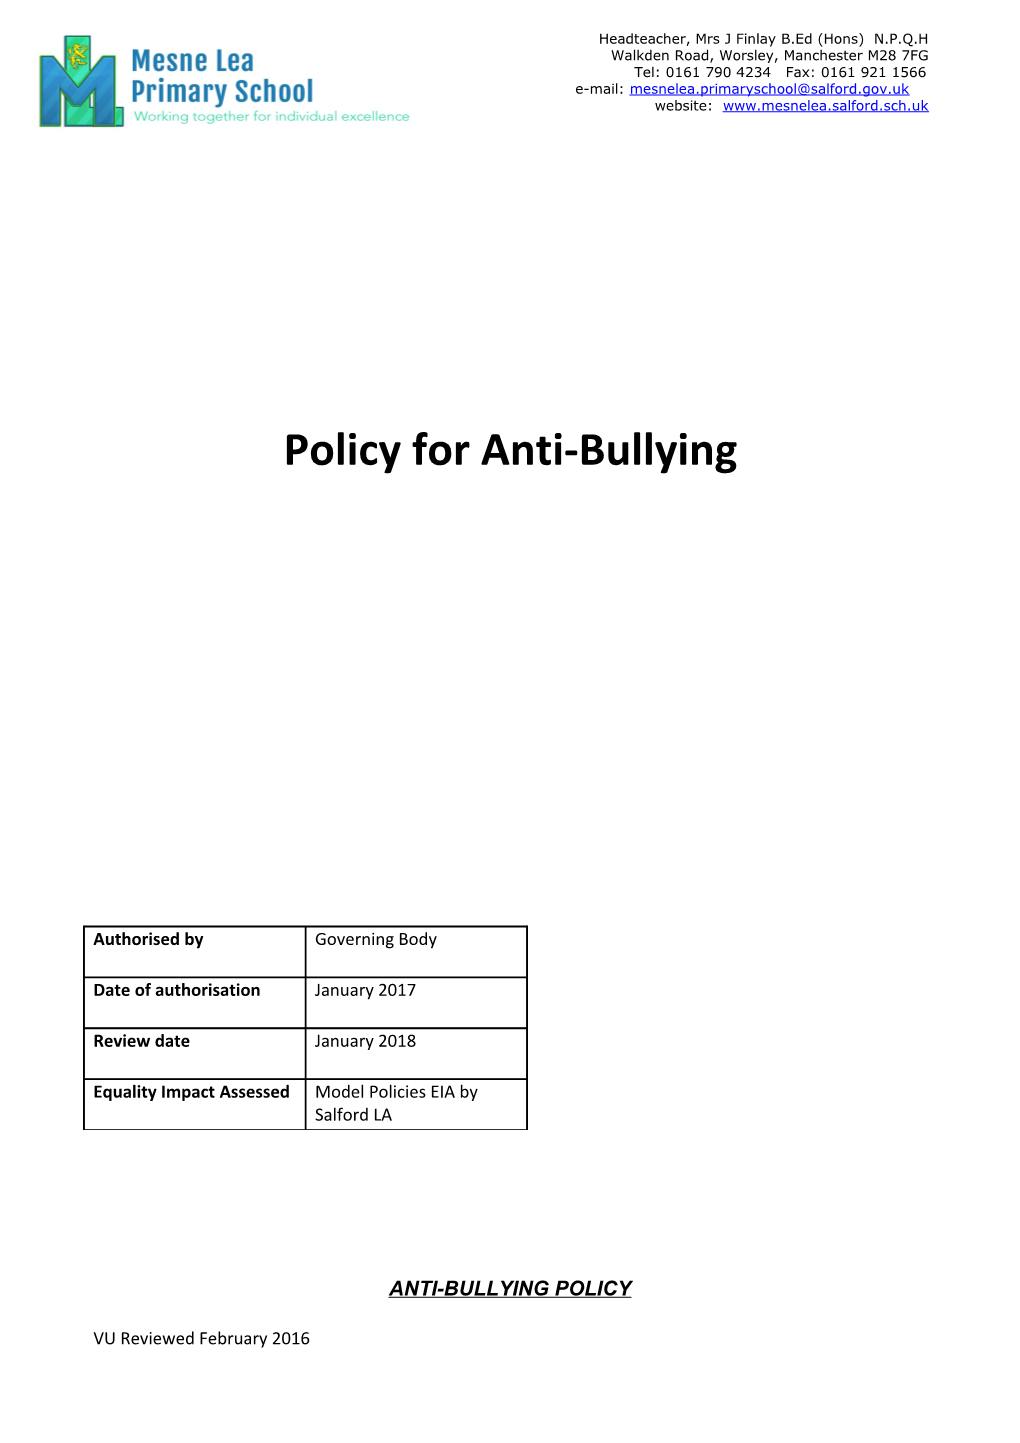 Policy for Anti-Bullying